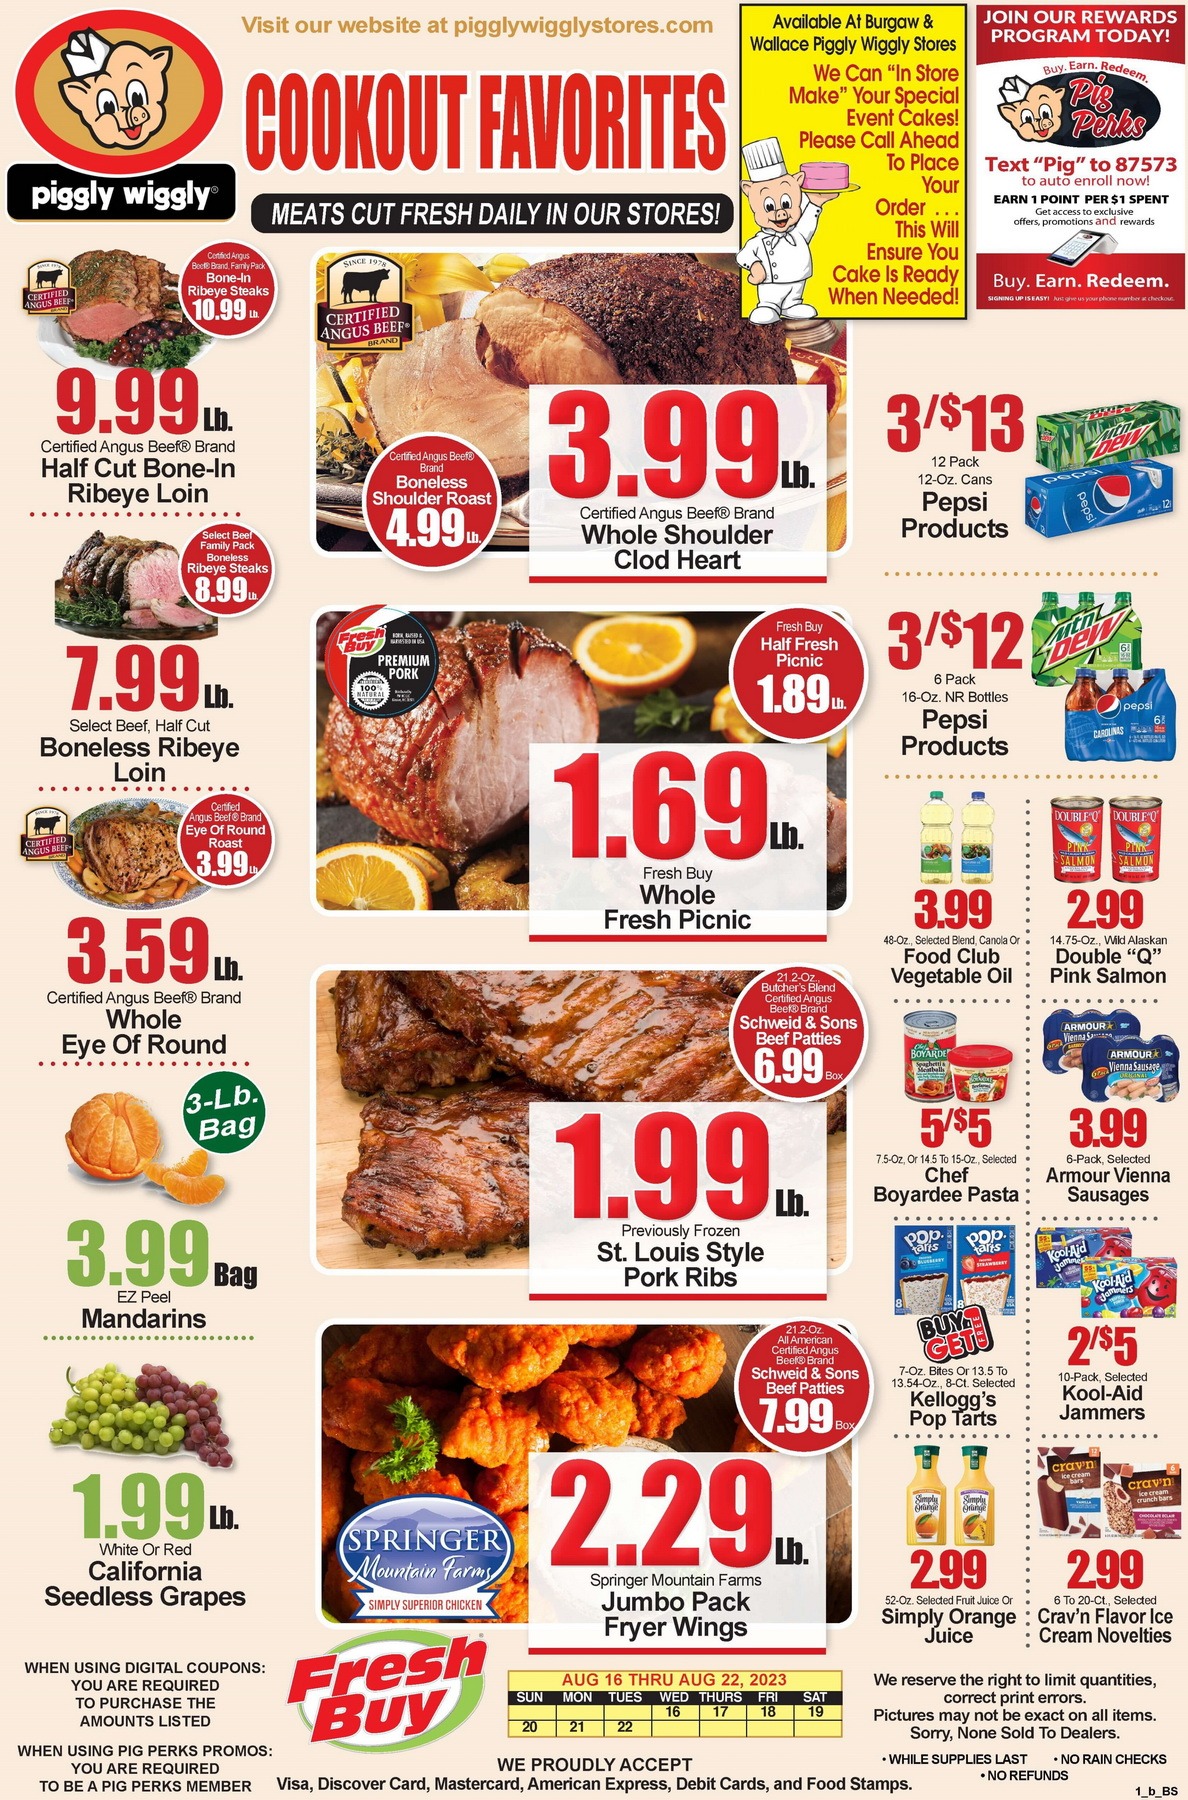 Piggly Wiggly Weekly Ad Aug 16 – Aug 22, 2023